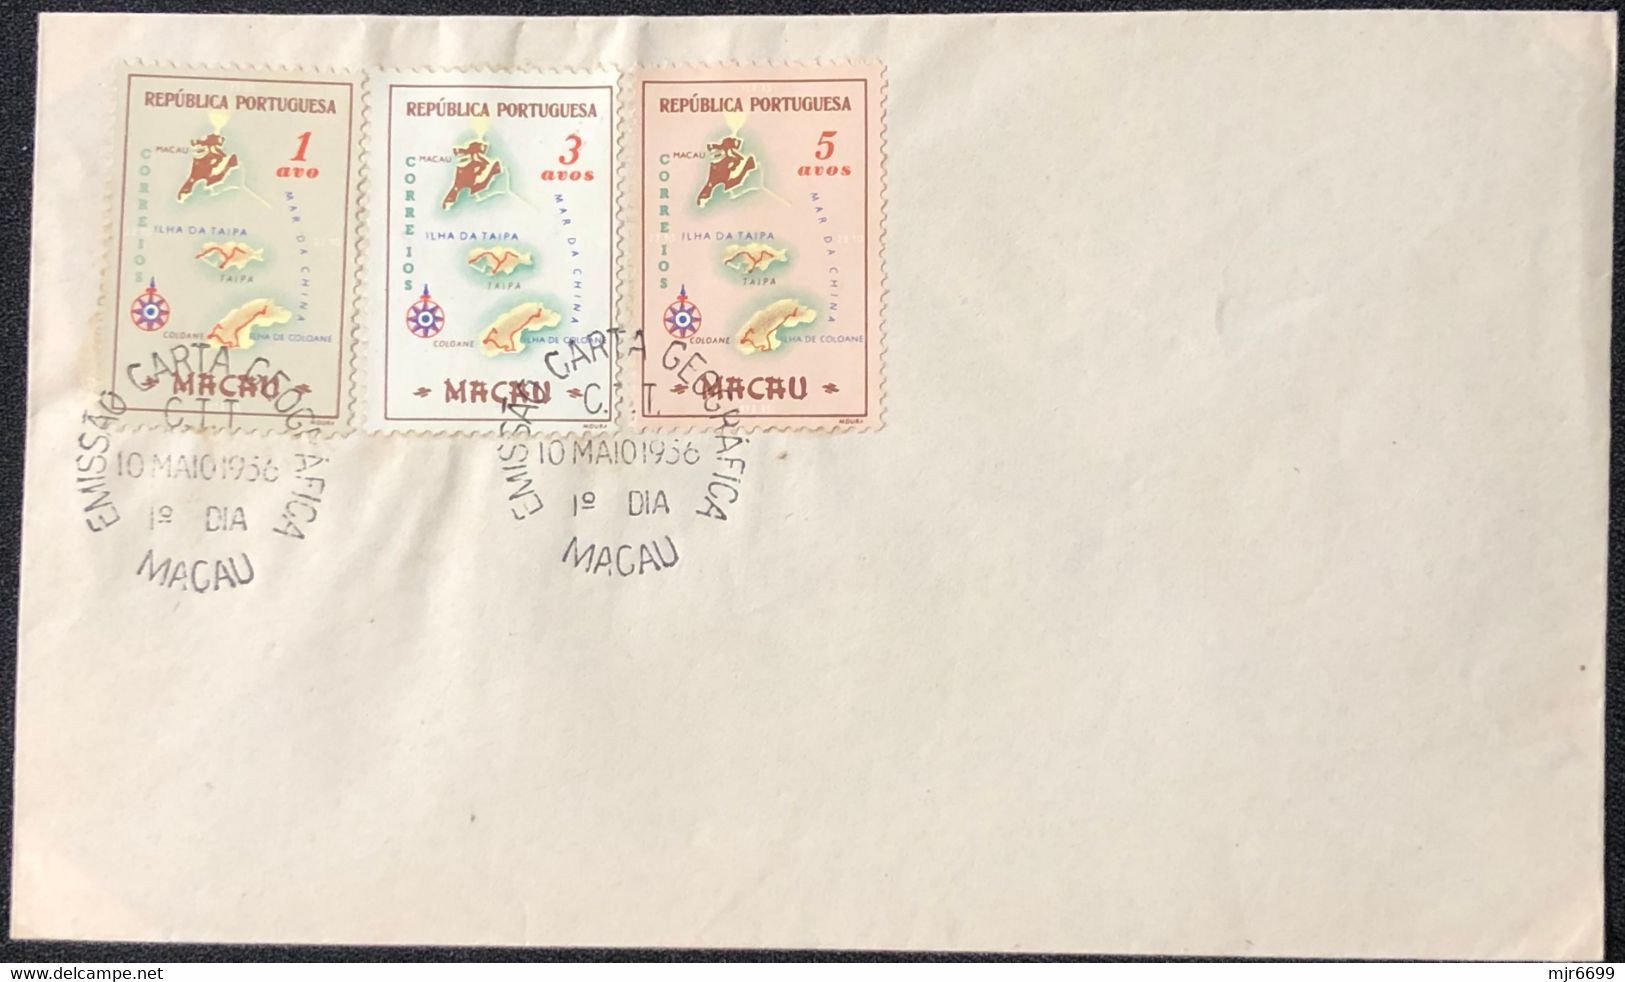 1956 GEOGRAPHIC CHART OF MACAU FDC X 4 COVERS ALL DIFFERENT - CAT. 85 EUROSOR COMPLETE SET. - Briefe U. Dokumente